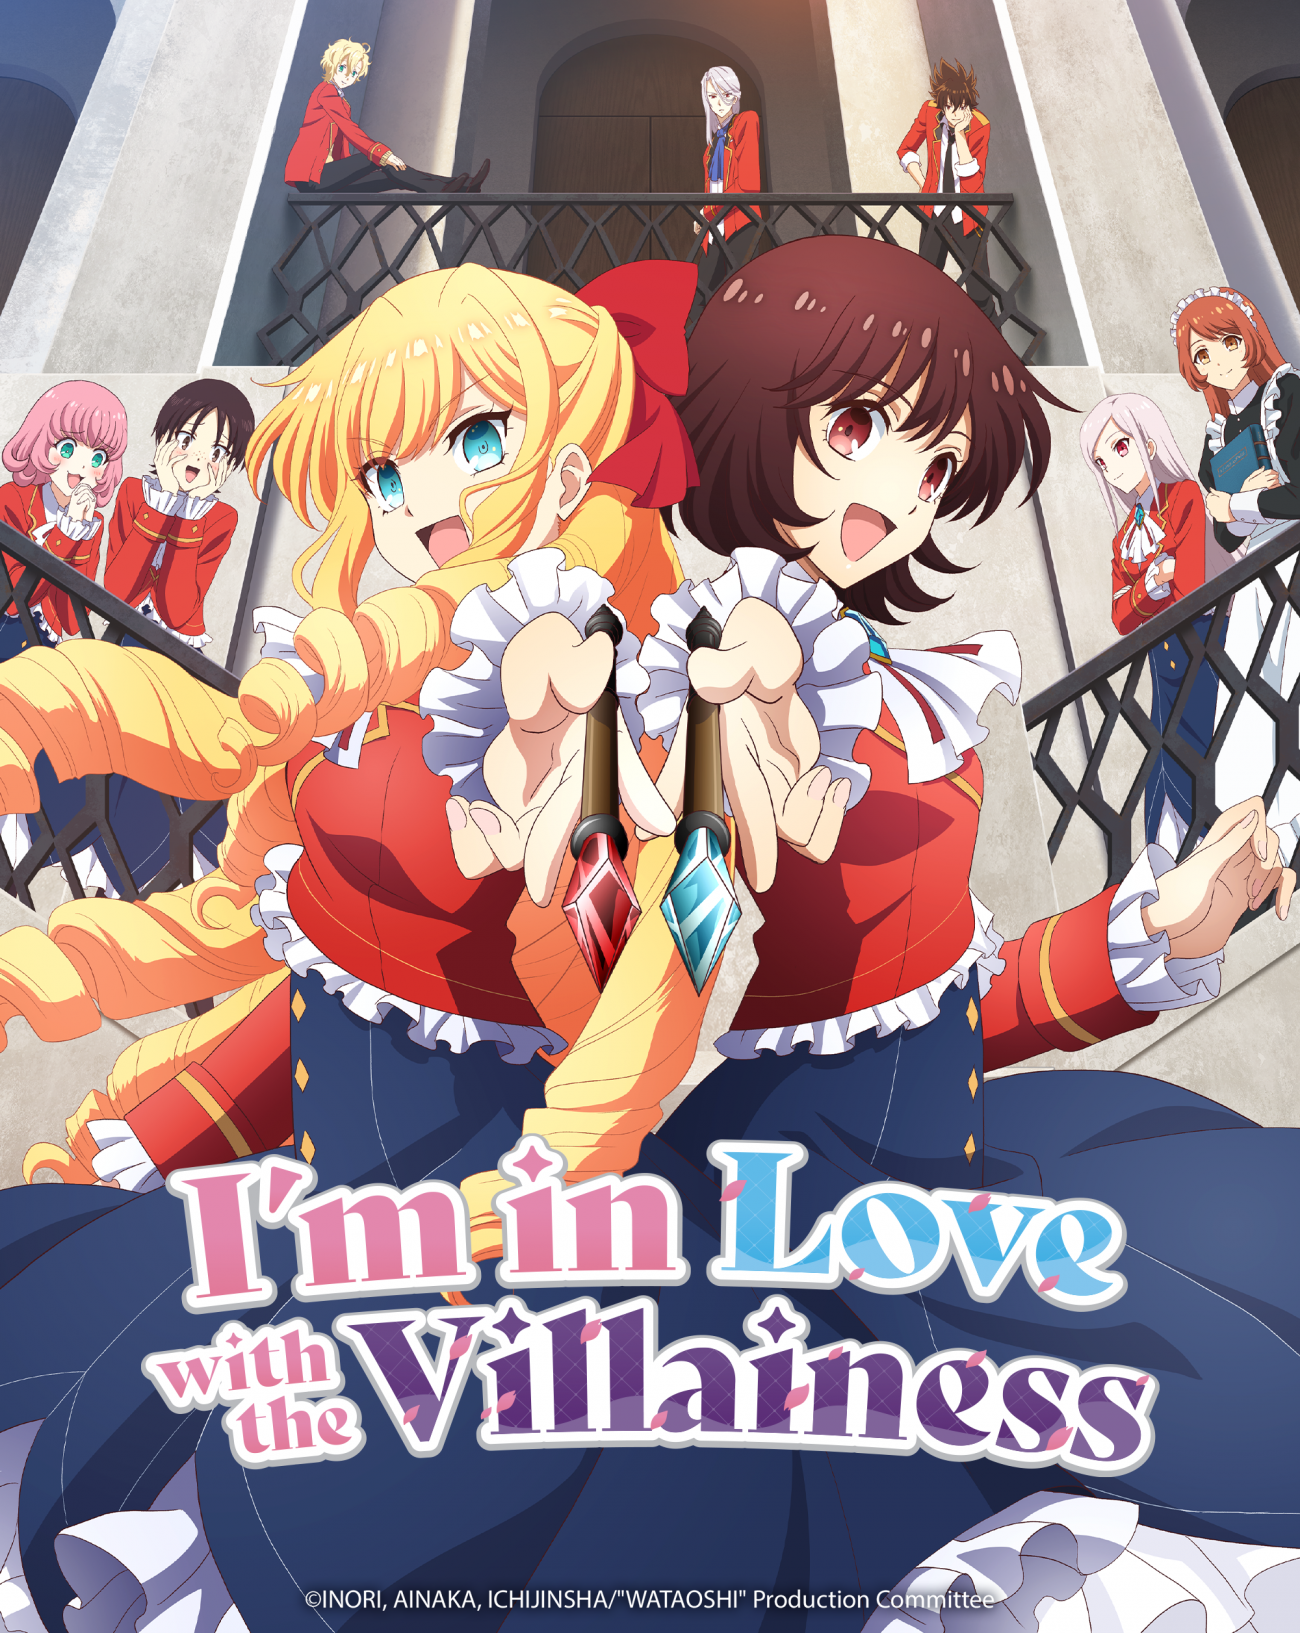 Rise of the Villainess: How the reborn bad girls of otome games